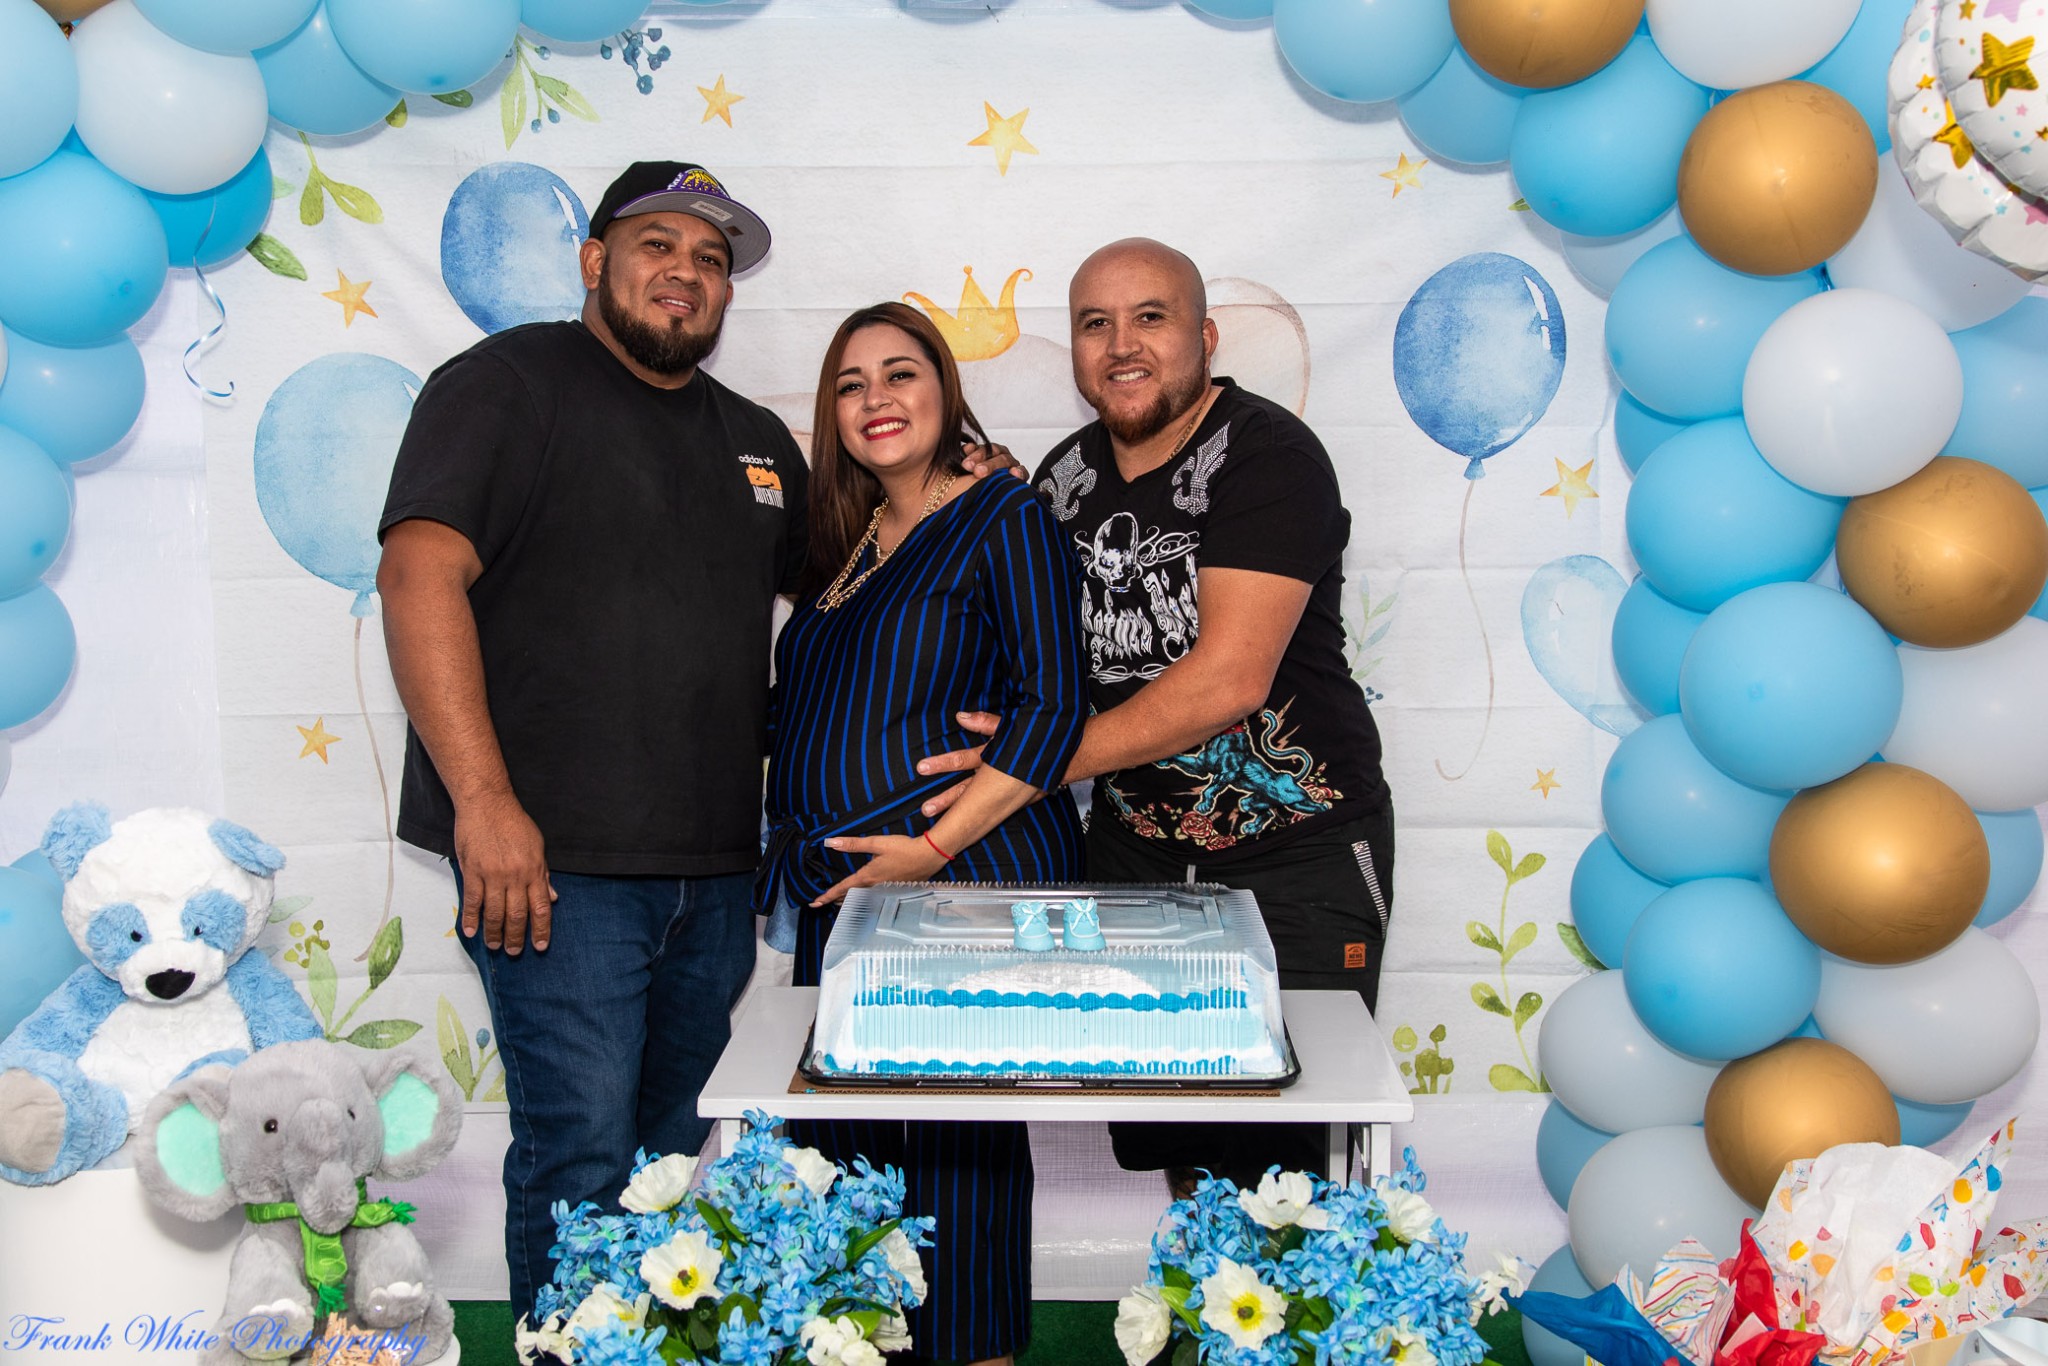 Christian-Baby-Shower-and-Family-Event-8.jpg